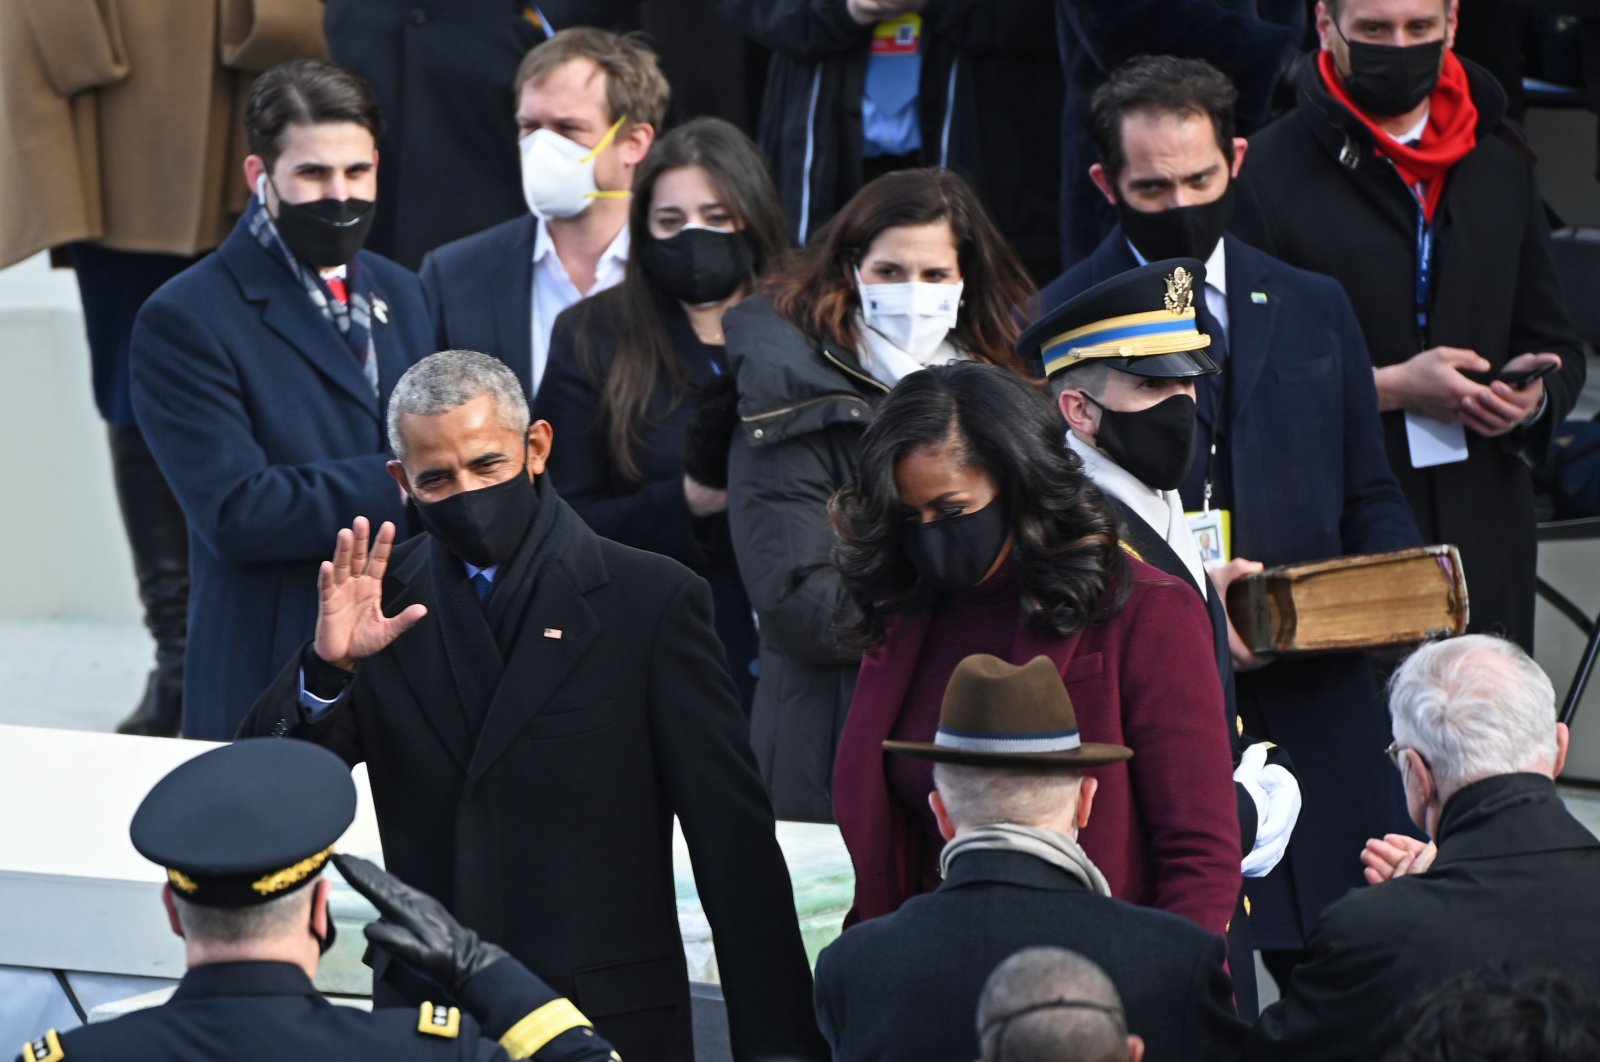 Former President Barack Obama and wife Michelle are greeted as they arrive on Capitol Hill before Joe Biden is sworn in as the 46th U.S. President, U.S. Capitol, Washington, DC, Jan. 20, 2021. (AFP Photo)